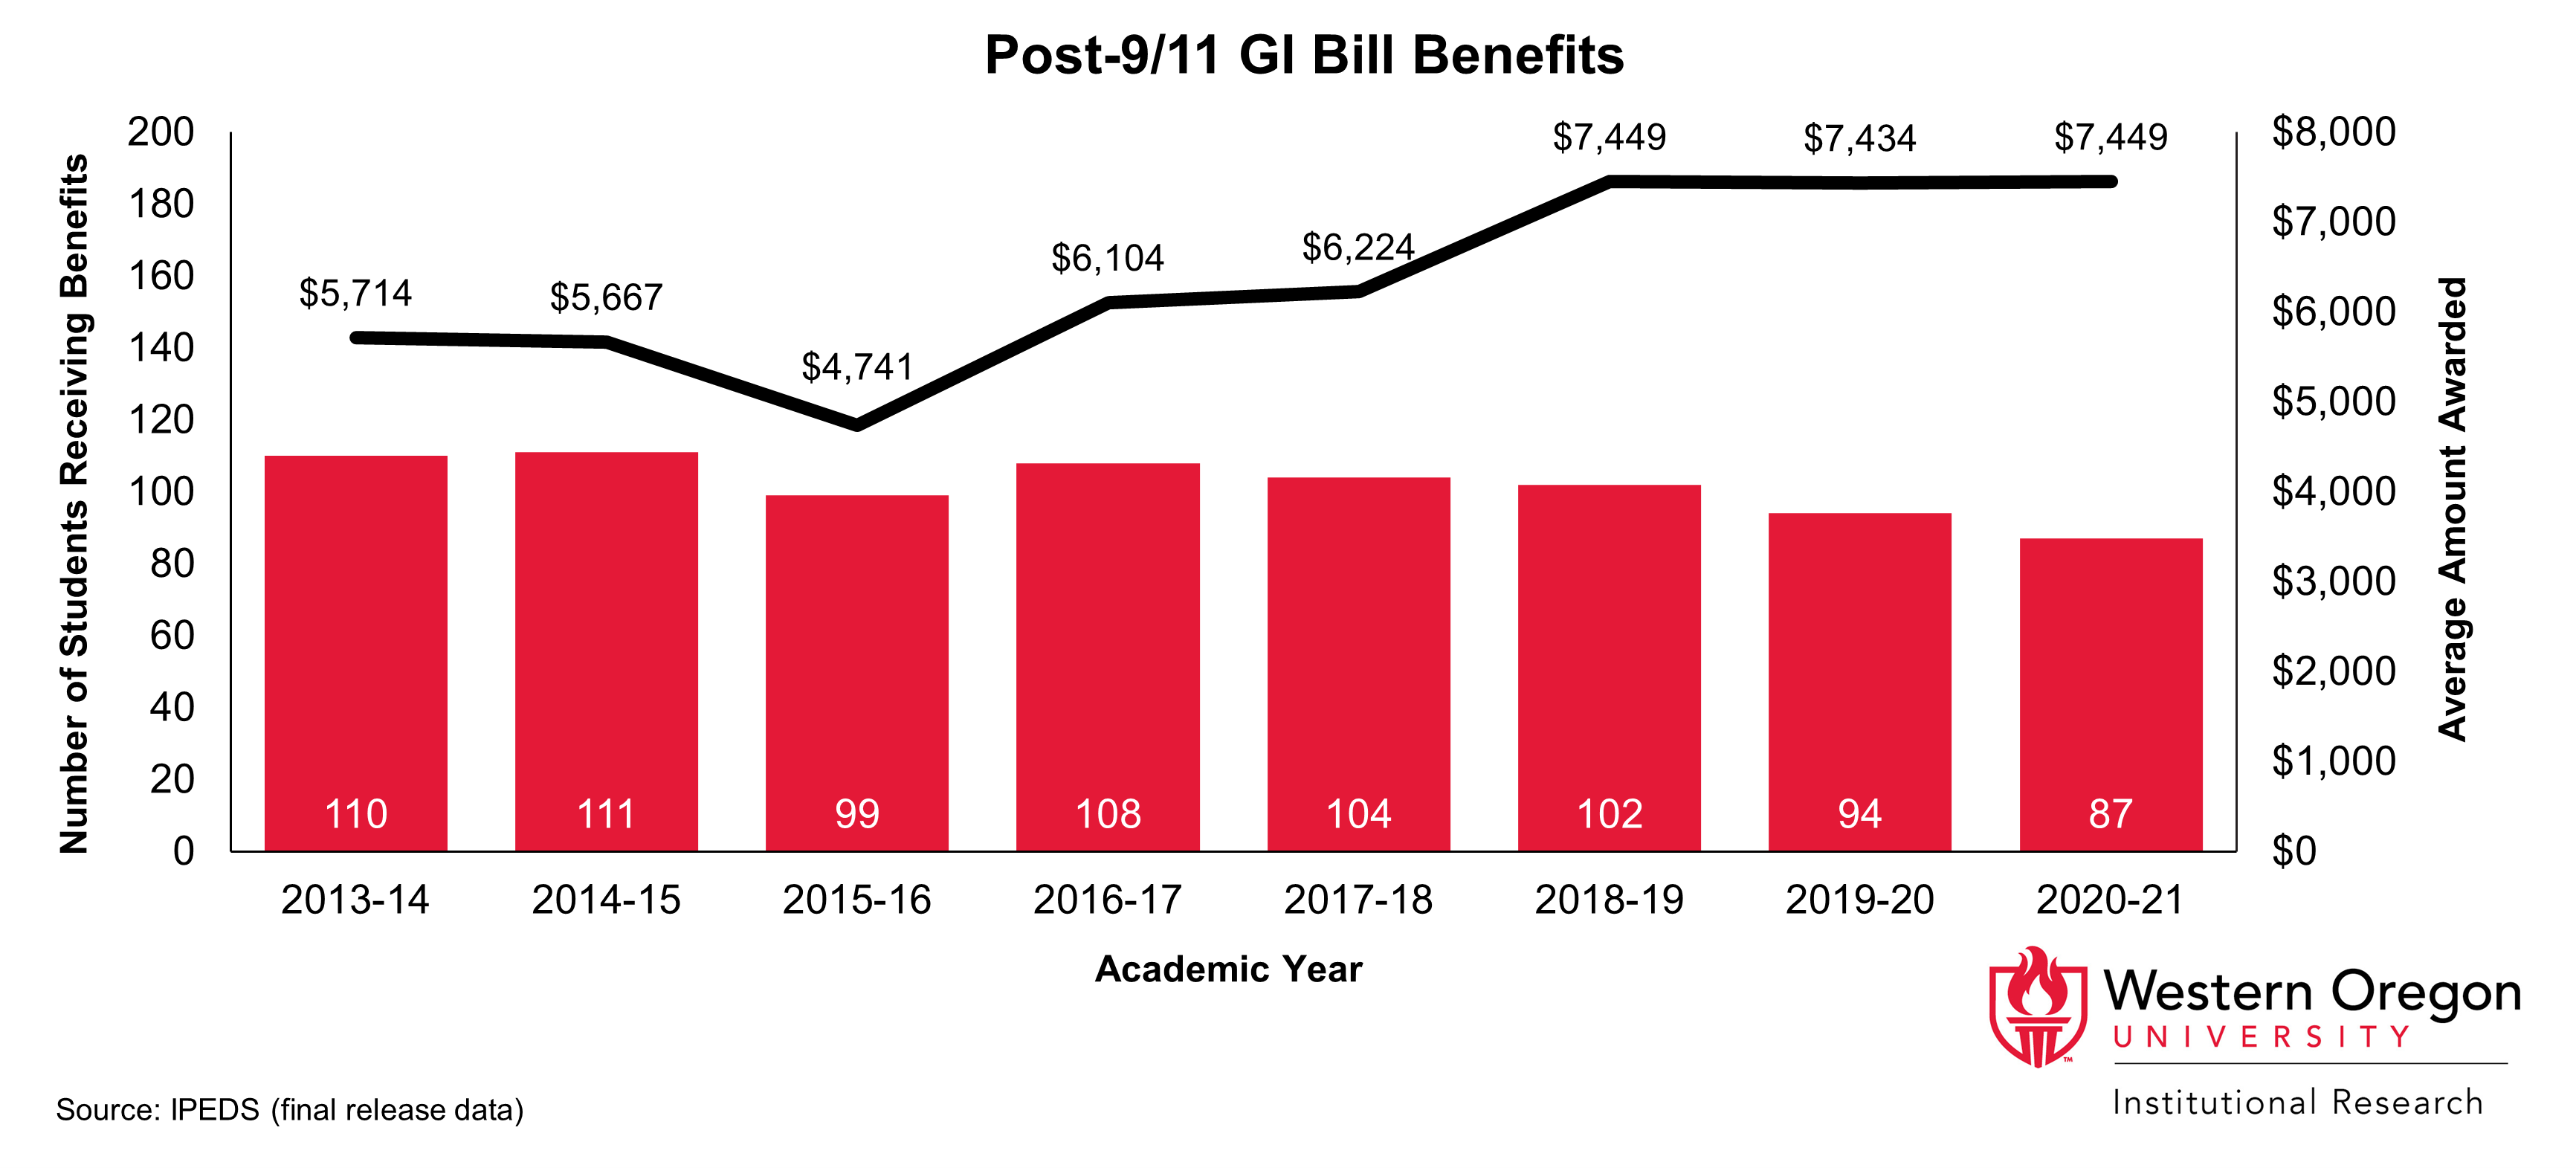 Bar and line graph of the number of students recieving post-9/11 GI Bill Benefits and the average amount awarded from 2013 to 2021, showing that the number of students has remained relatively steady while the average amount awarded has increased since 2016.